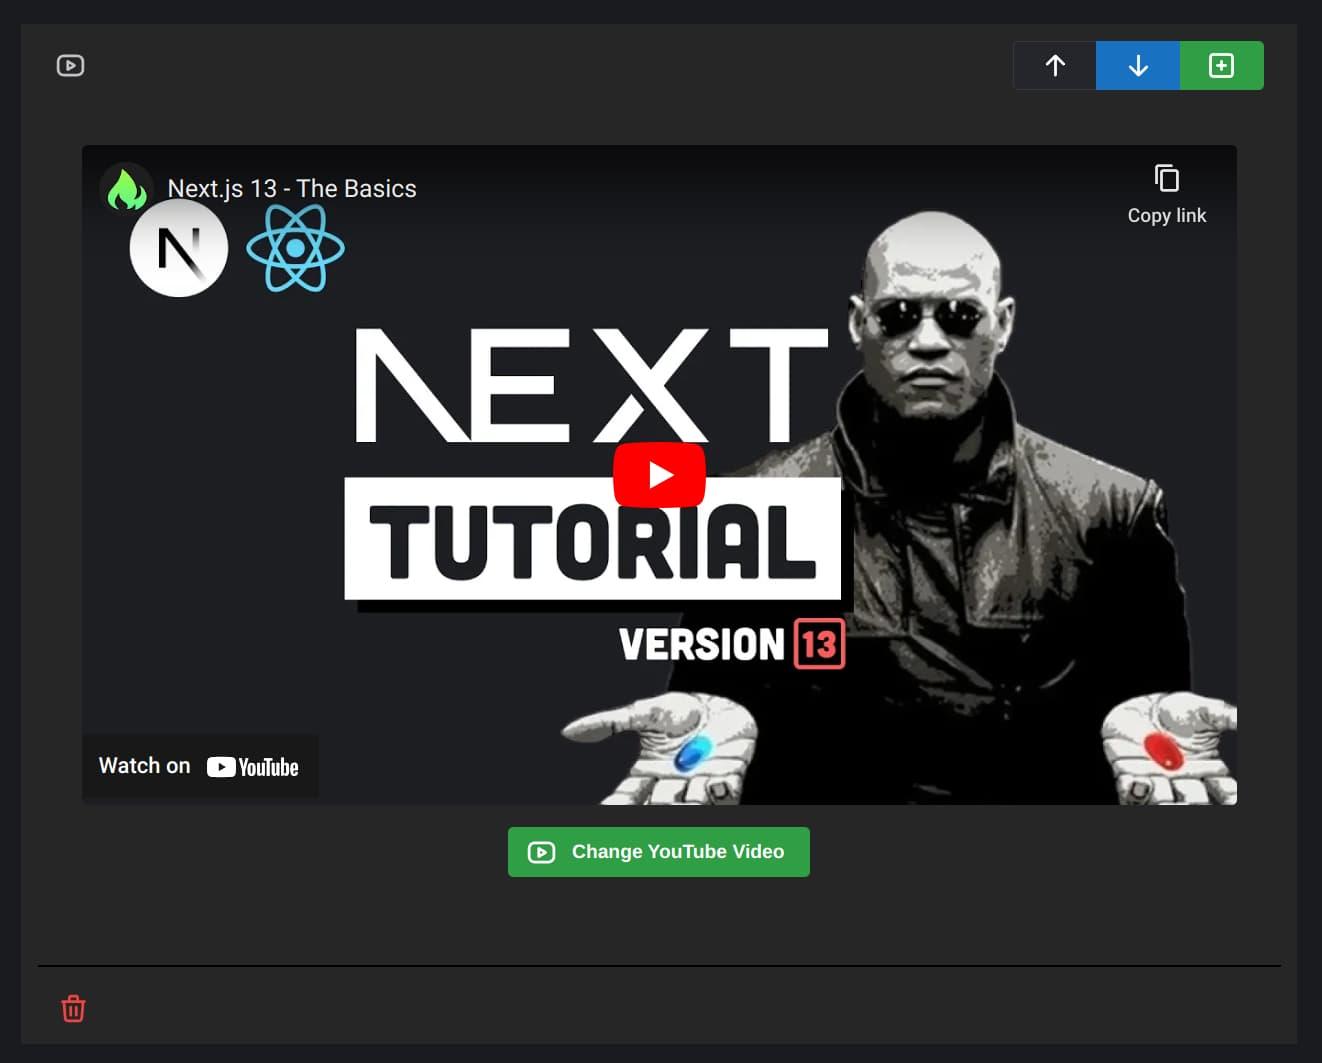 A screenshot of a YouTube widget. The video is shown inside the widget's body, with a 'Change YouTube Video' button below it. The video itself is by Fireship, an introduction to Next.js version 13, showing Morpheus from the Matrix (1999) holding pills